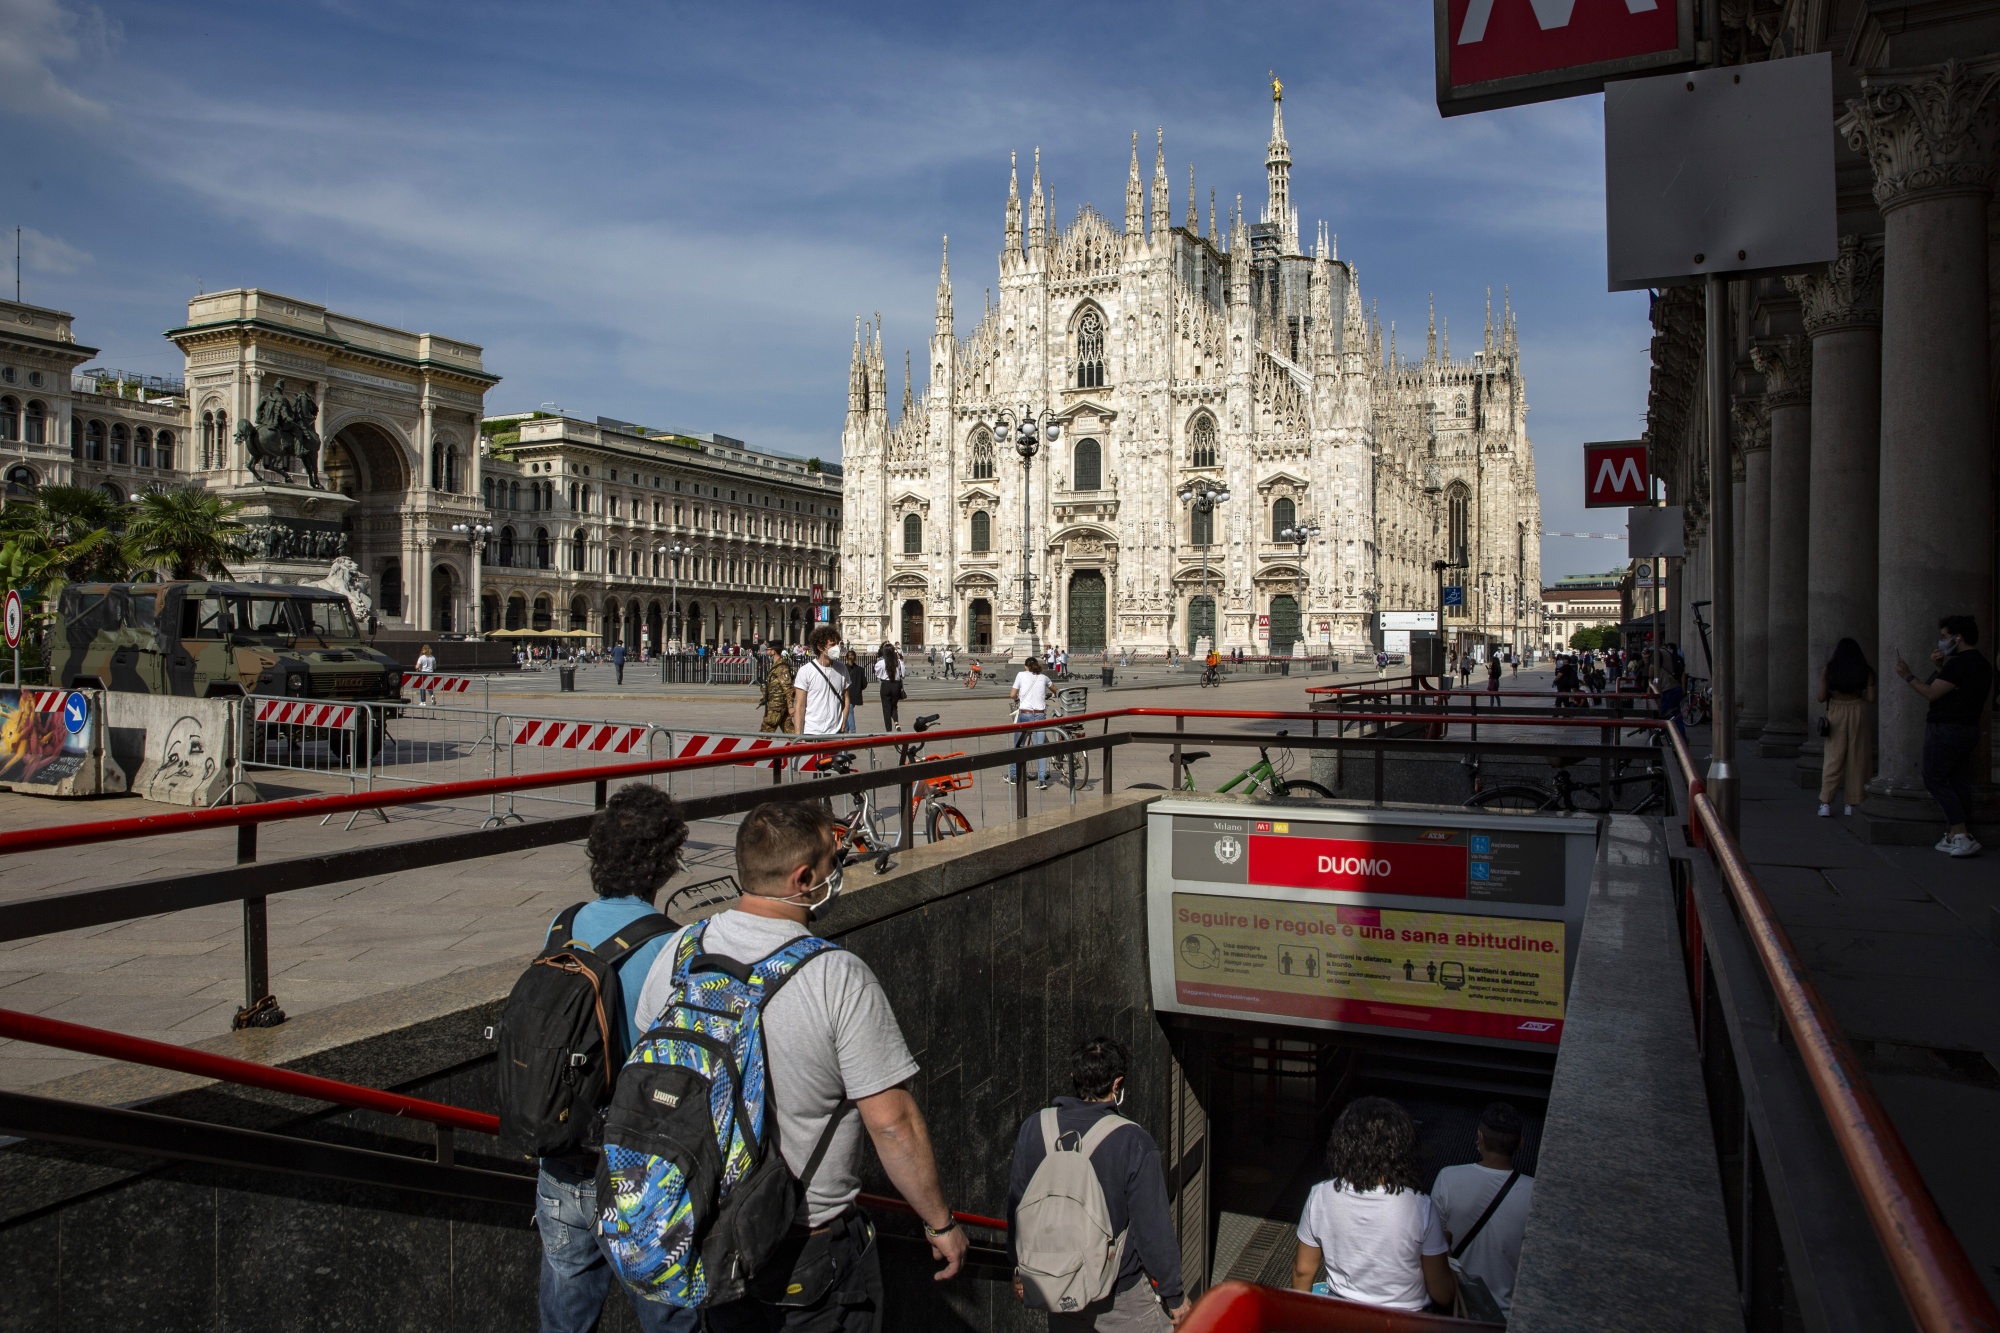 Passengers enter the Duomo metro station in the Cathedral square in Milan.